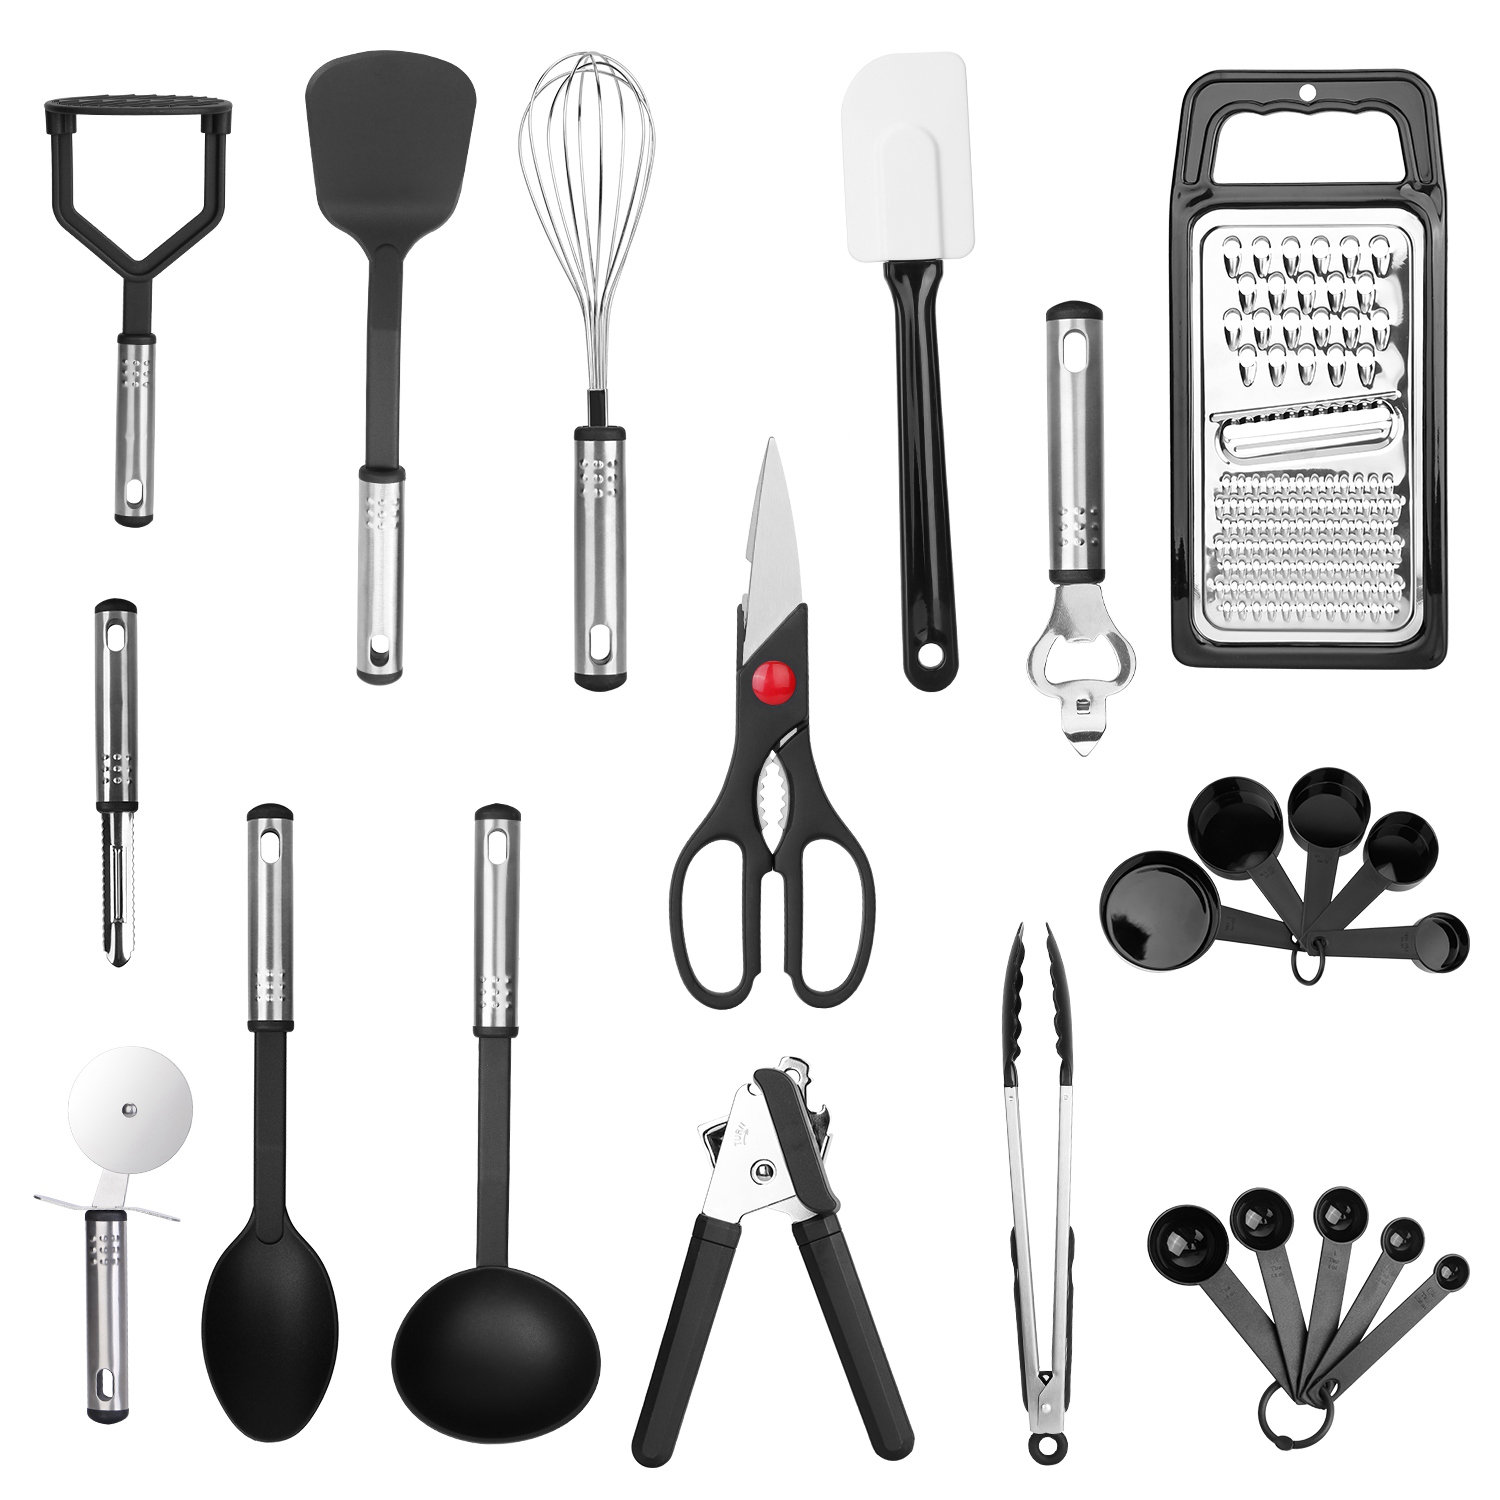 Everyday Collection 4 Piece Mini Kitchen Utensil Set- Silicone Kitchen  Tools with Spatulas and Spoons (Black)